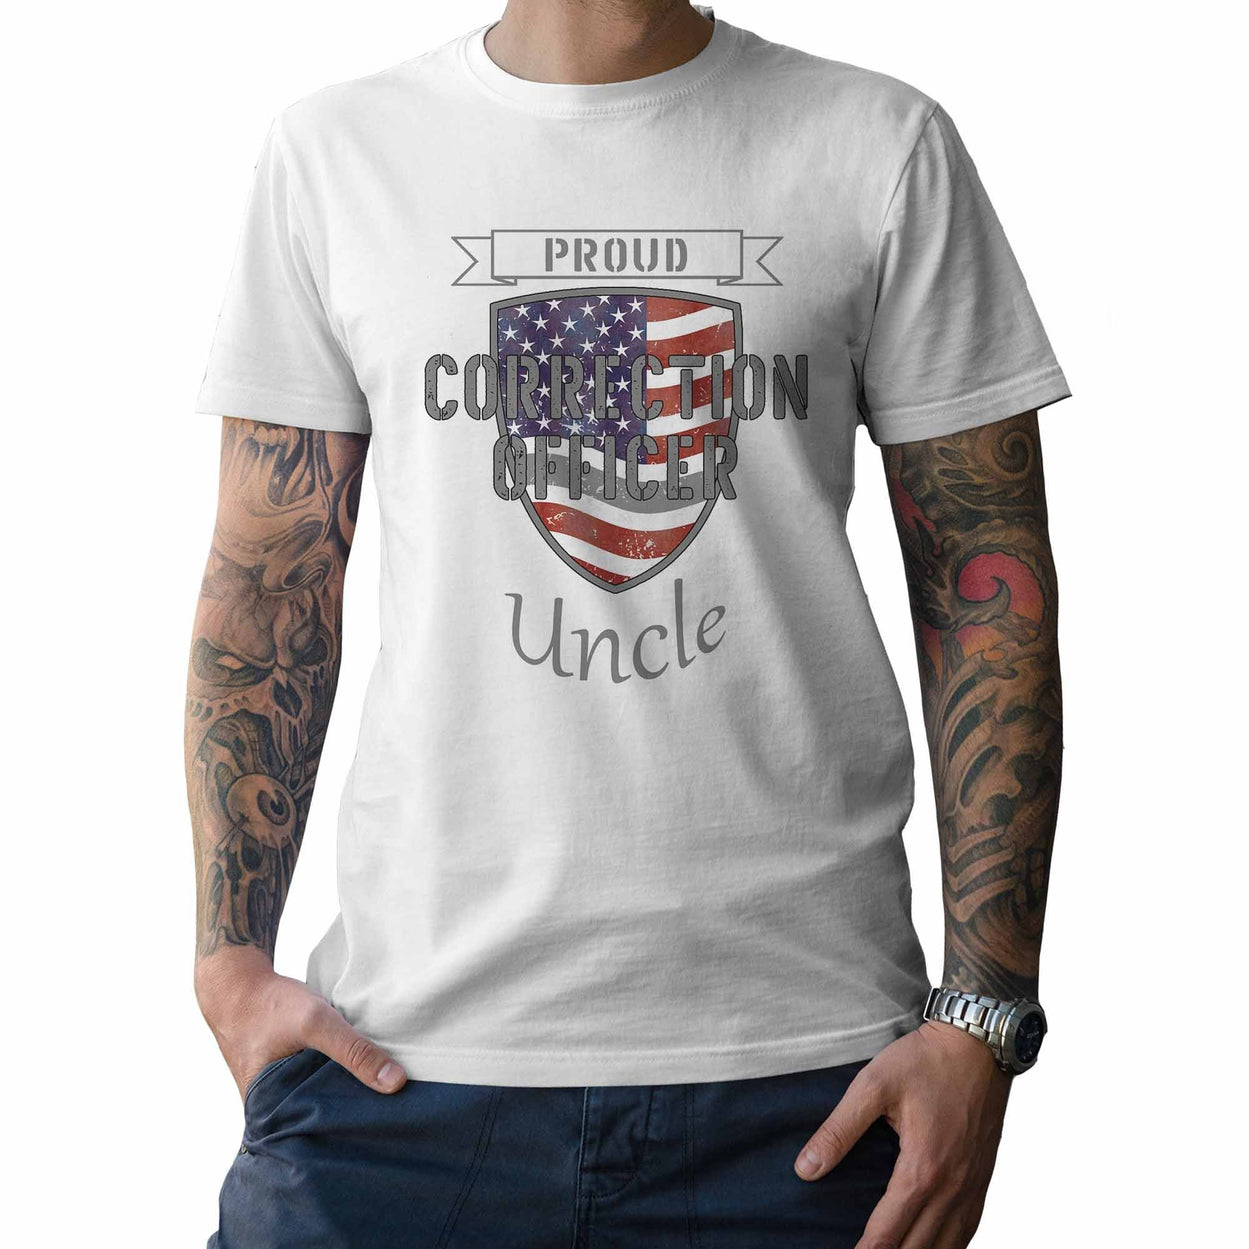 Proud Correction Officer Uncle - My Custom Tee Party